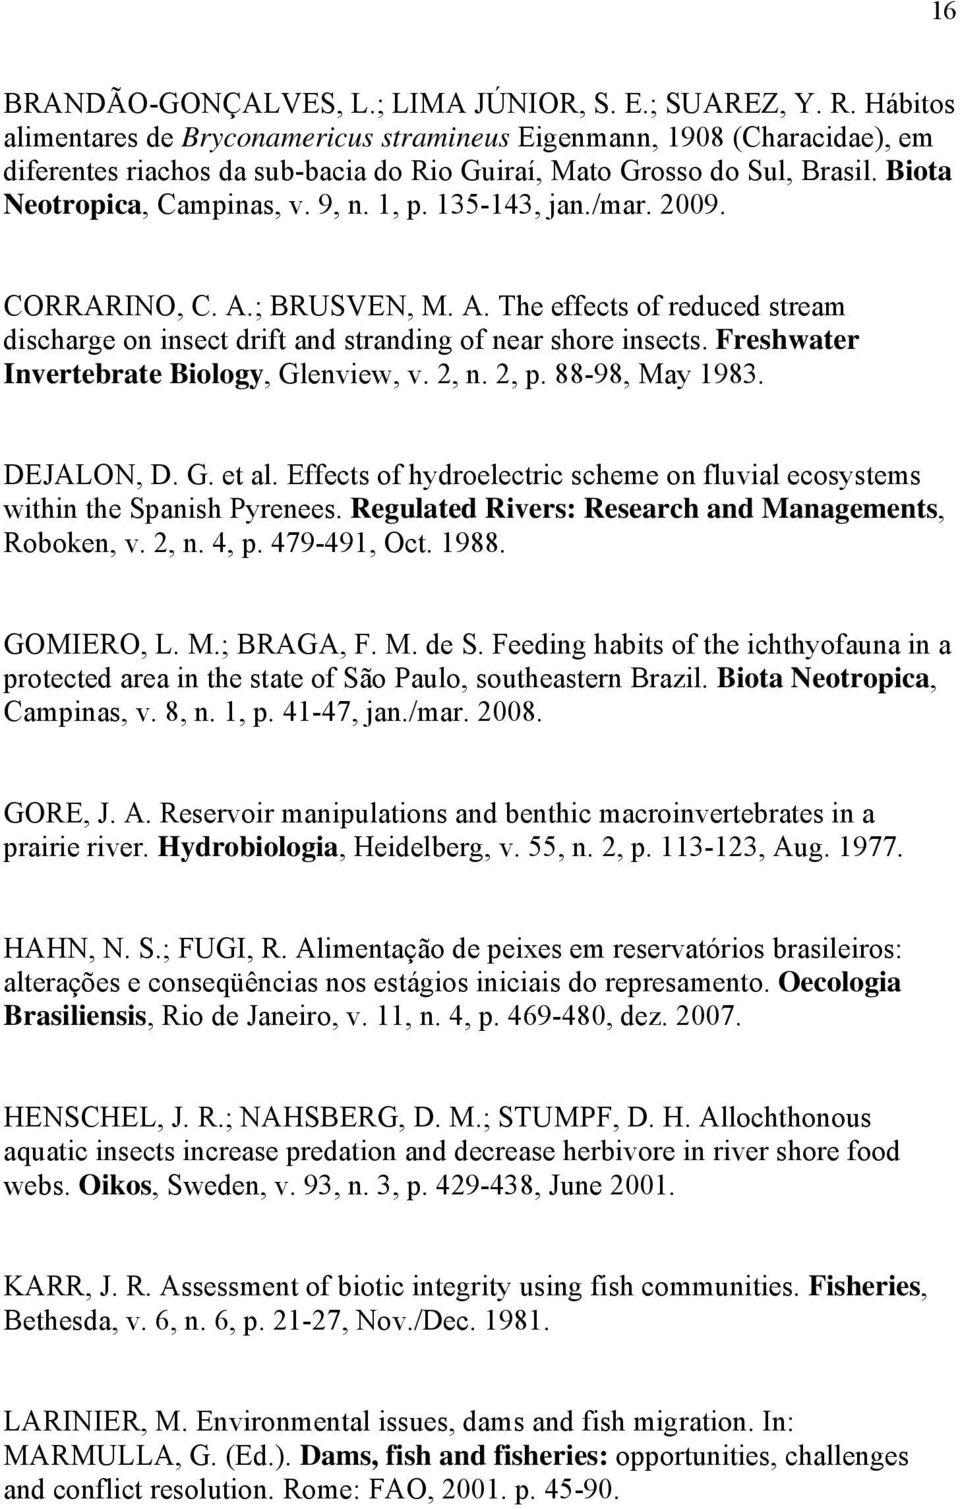 135-143, jan./mar. 2009. CORRARINO, C. A.; BRUSVEN, M. A. The effects of reduced stream discharge on insect drift and stranding of near shore insects. Freshwater Invertebrate Biology, Glenview, v.